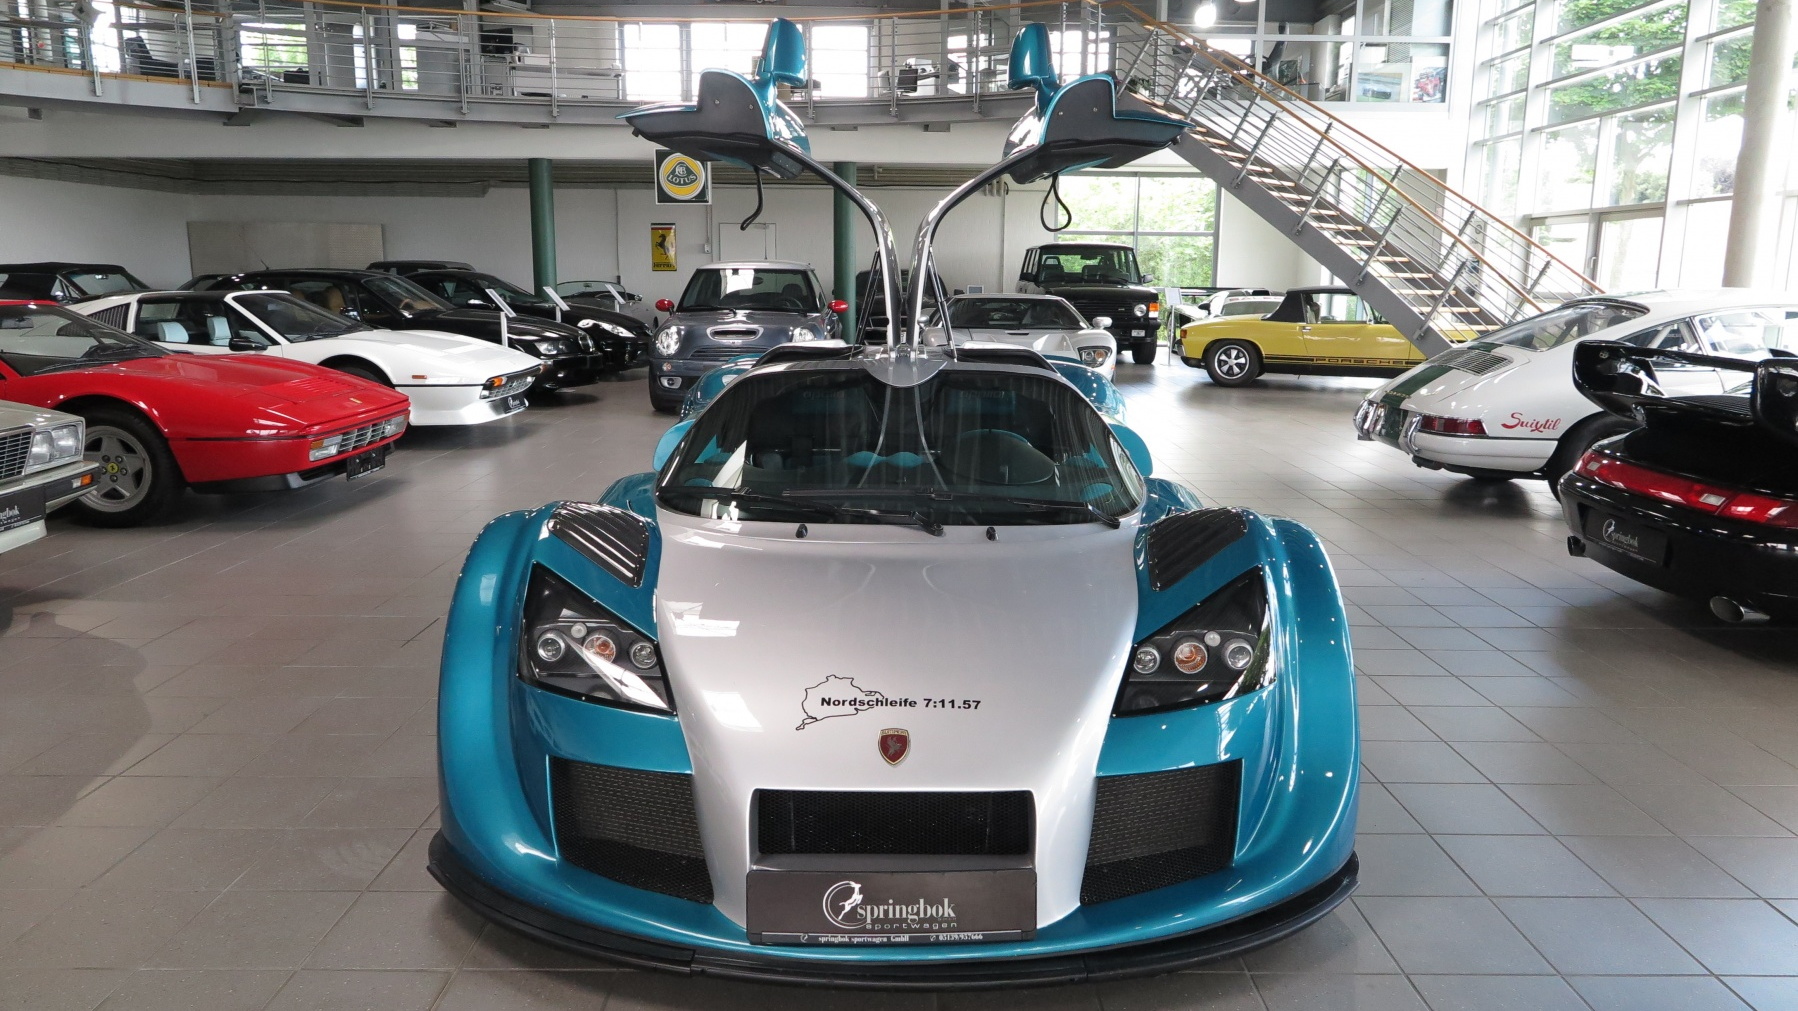 Nürburgring record-setting Gumpert Apollo is for sale